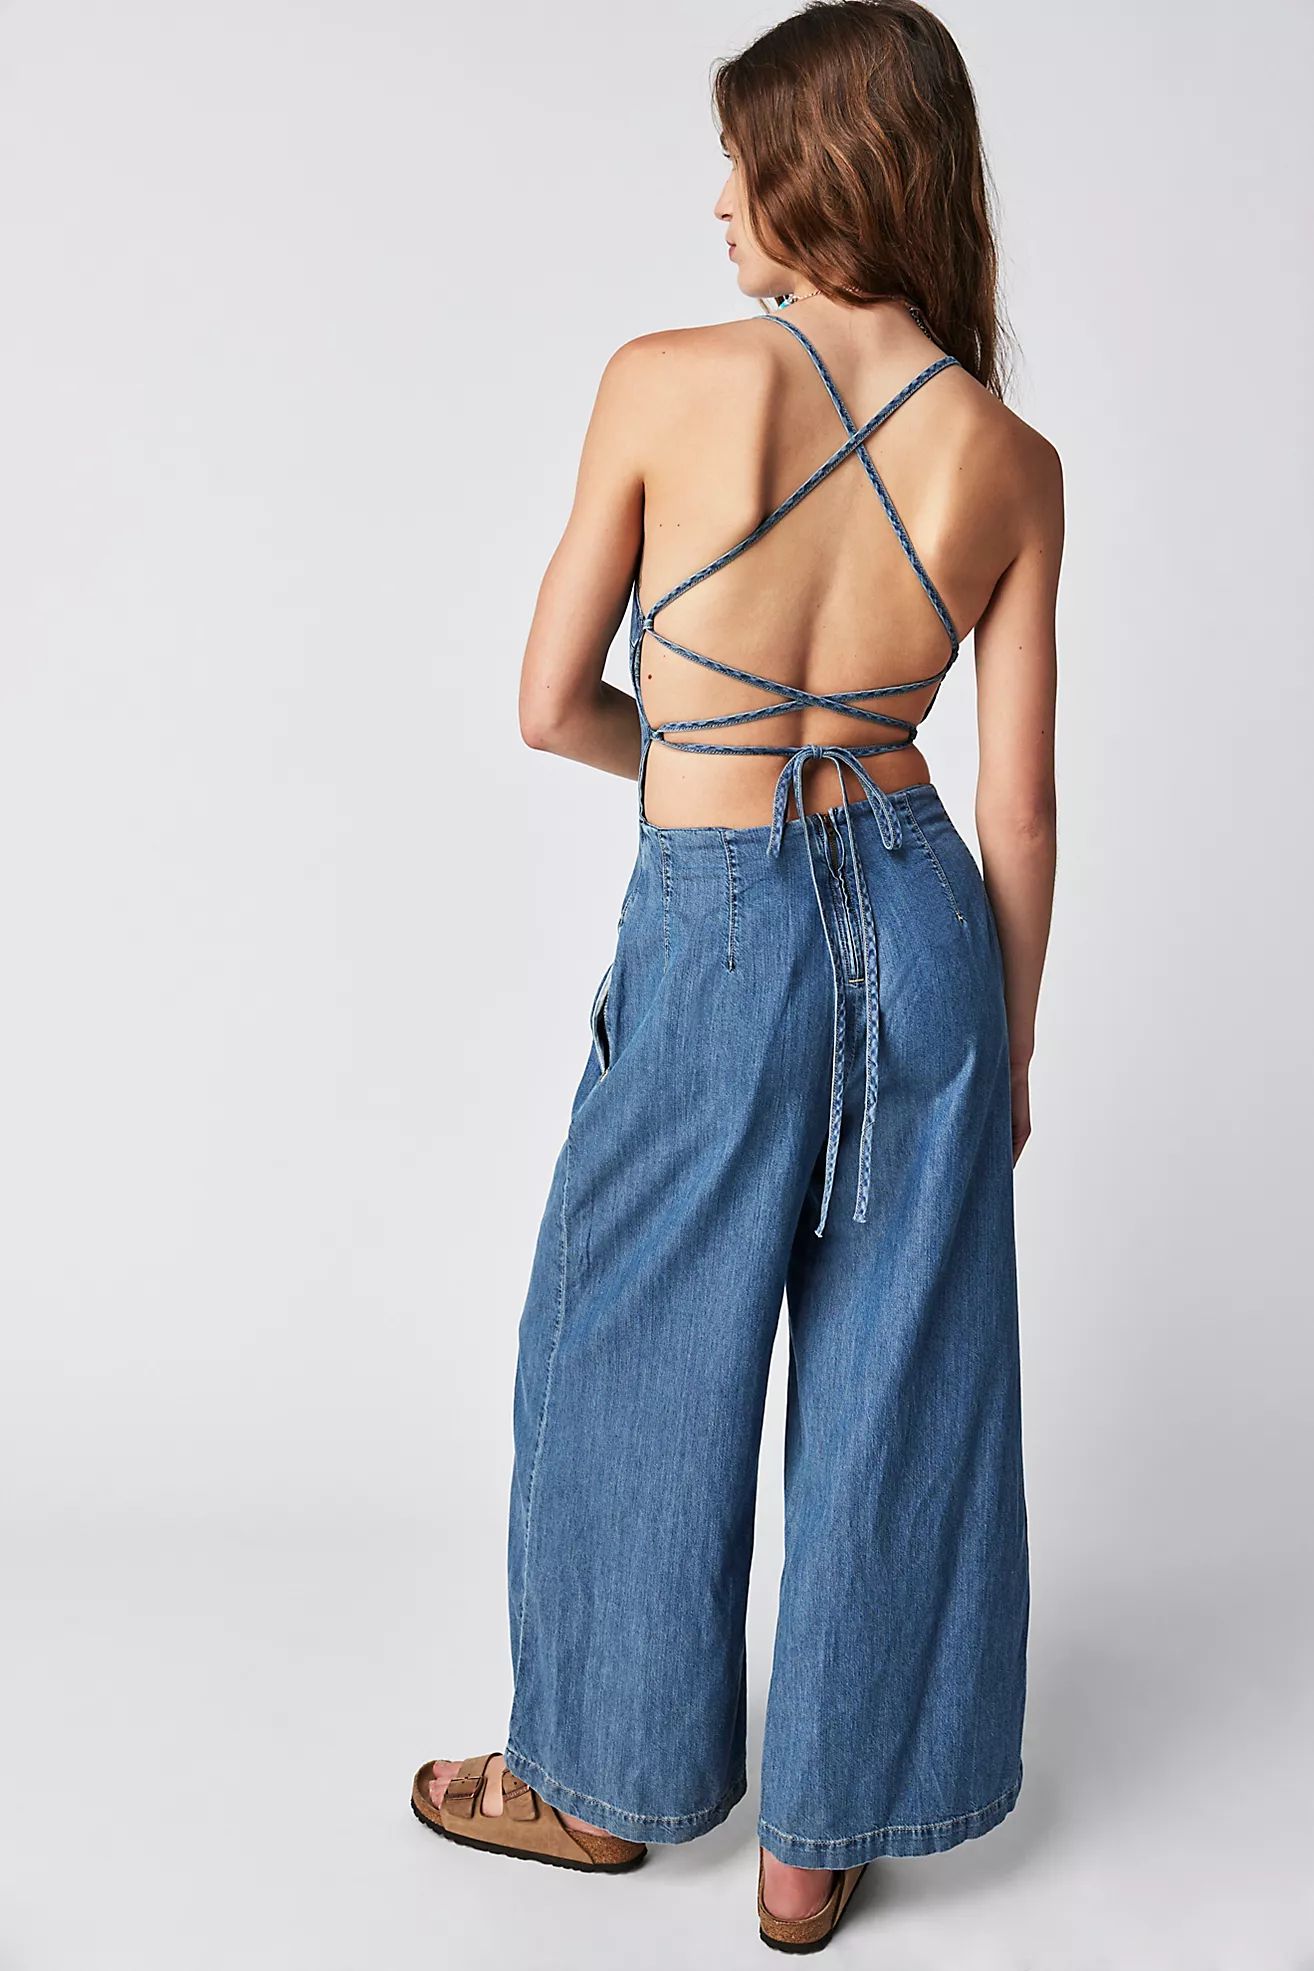 CRVY Set The Mood One-Piece | Free People (Global - UK&FR Excluded)